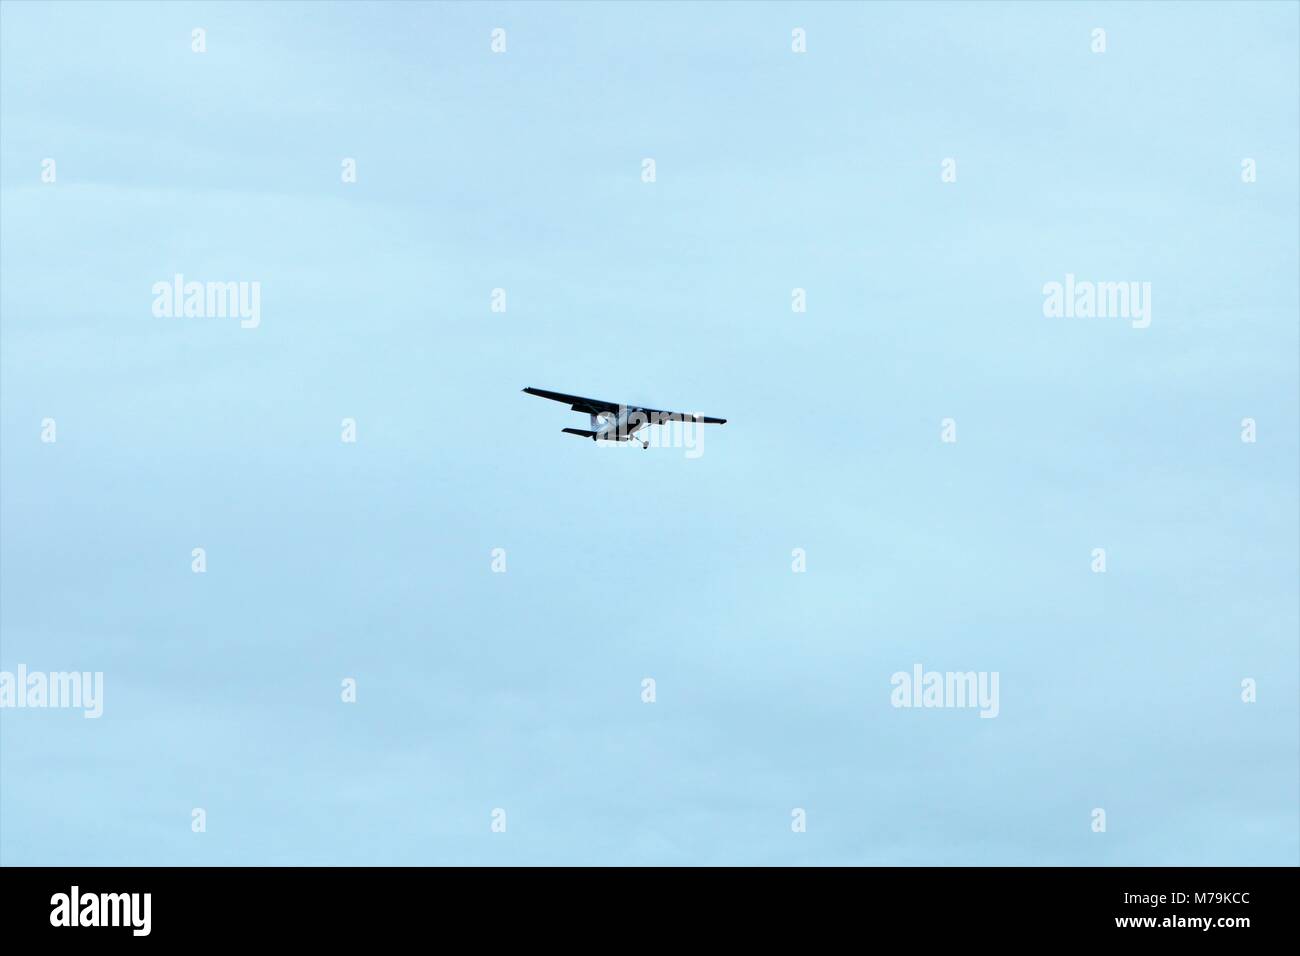 Cessna plane in mid flight in a blue cloudy sky Stock Photo